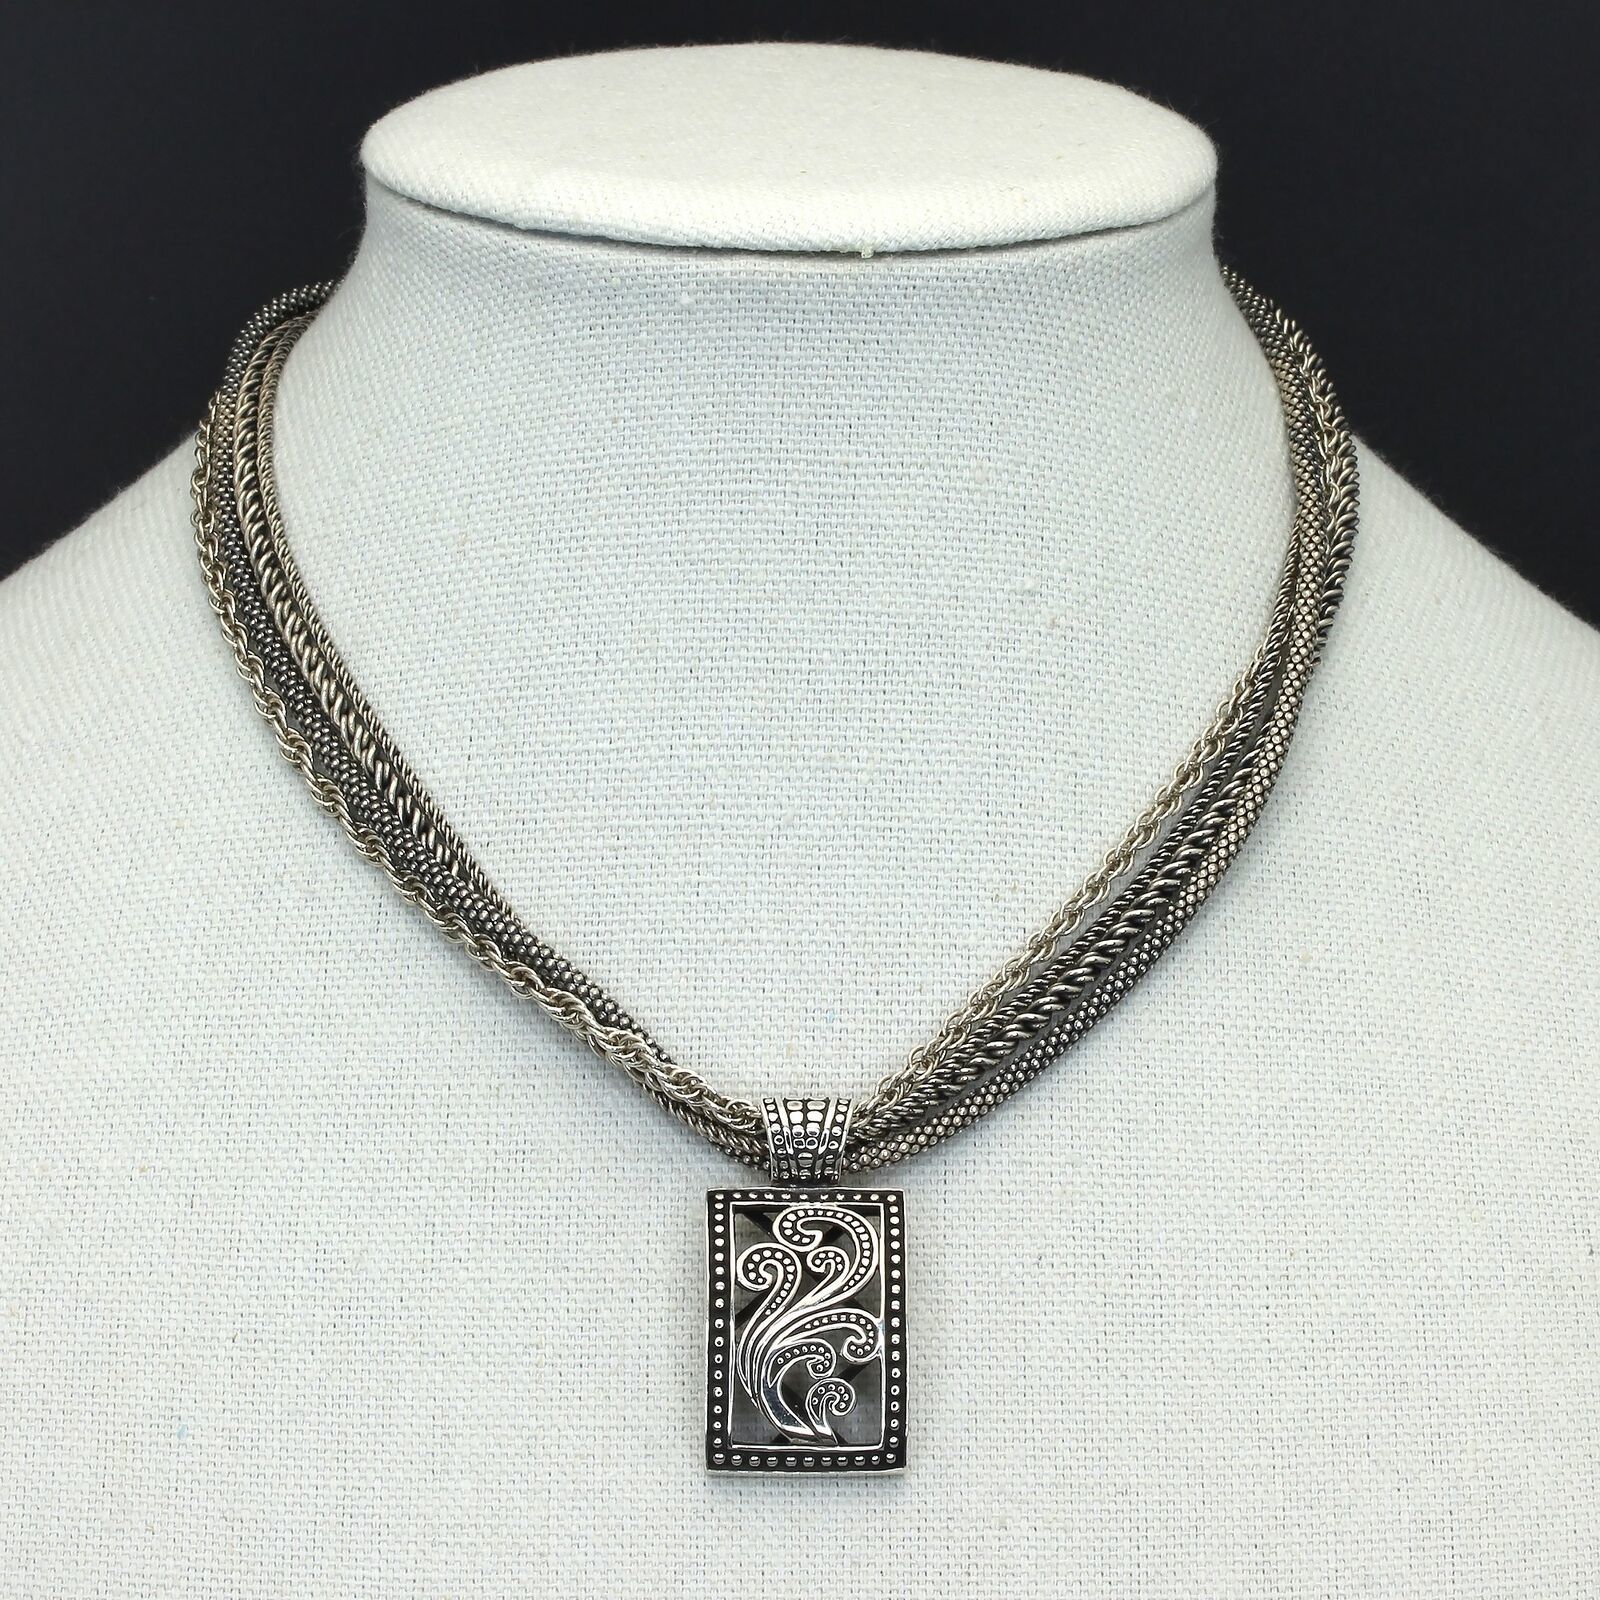 Retired Silpada Sterling Silver 4-Strand Chain with Paisley Pendant N1719 S1744 - $89.99